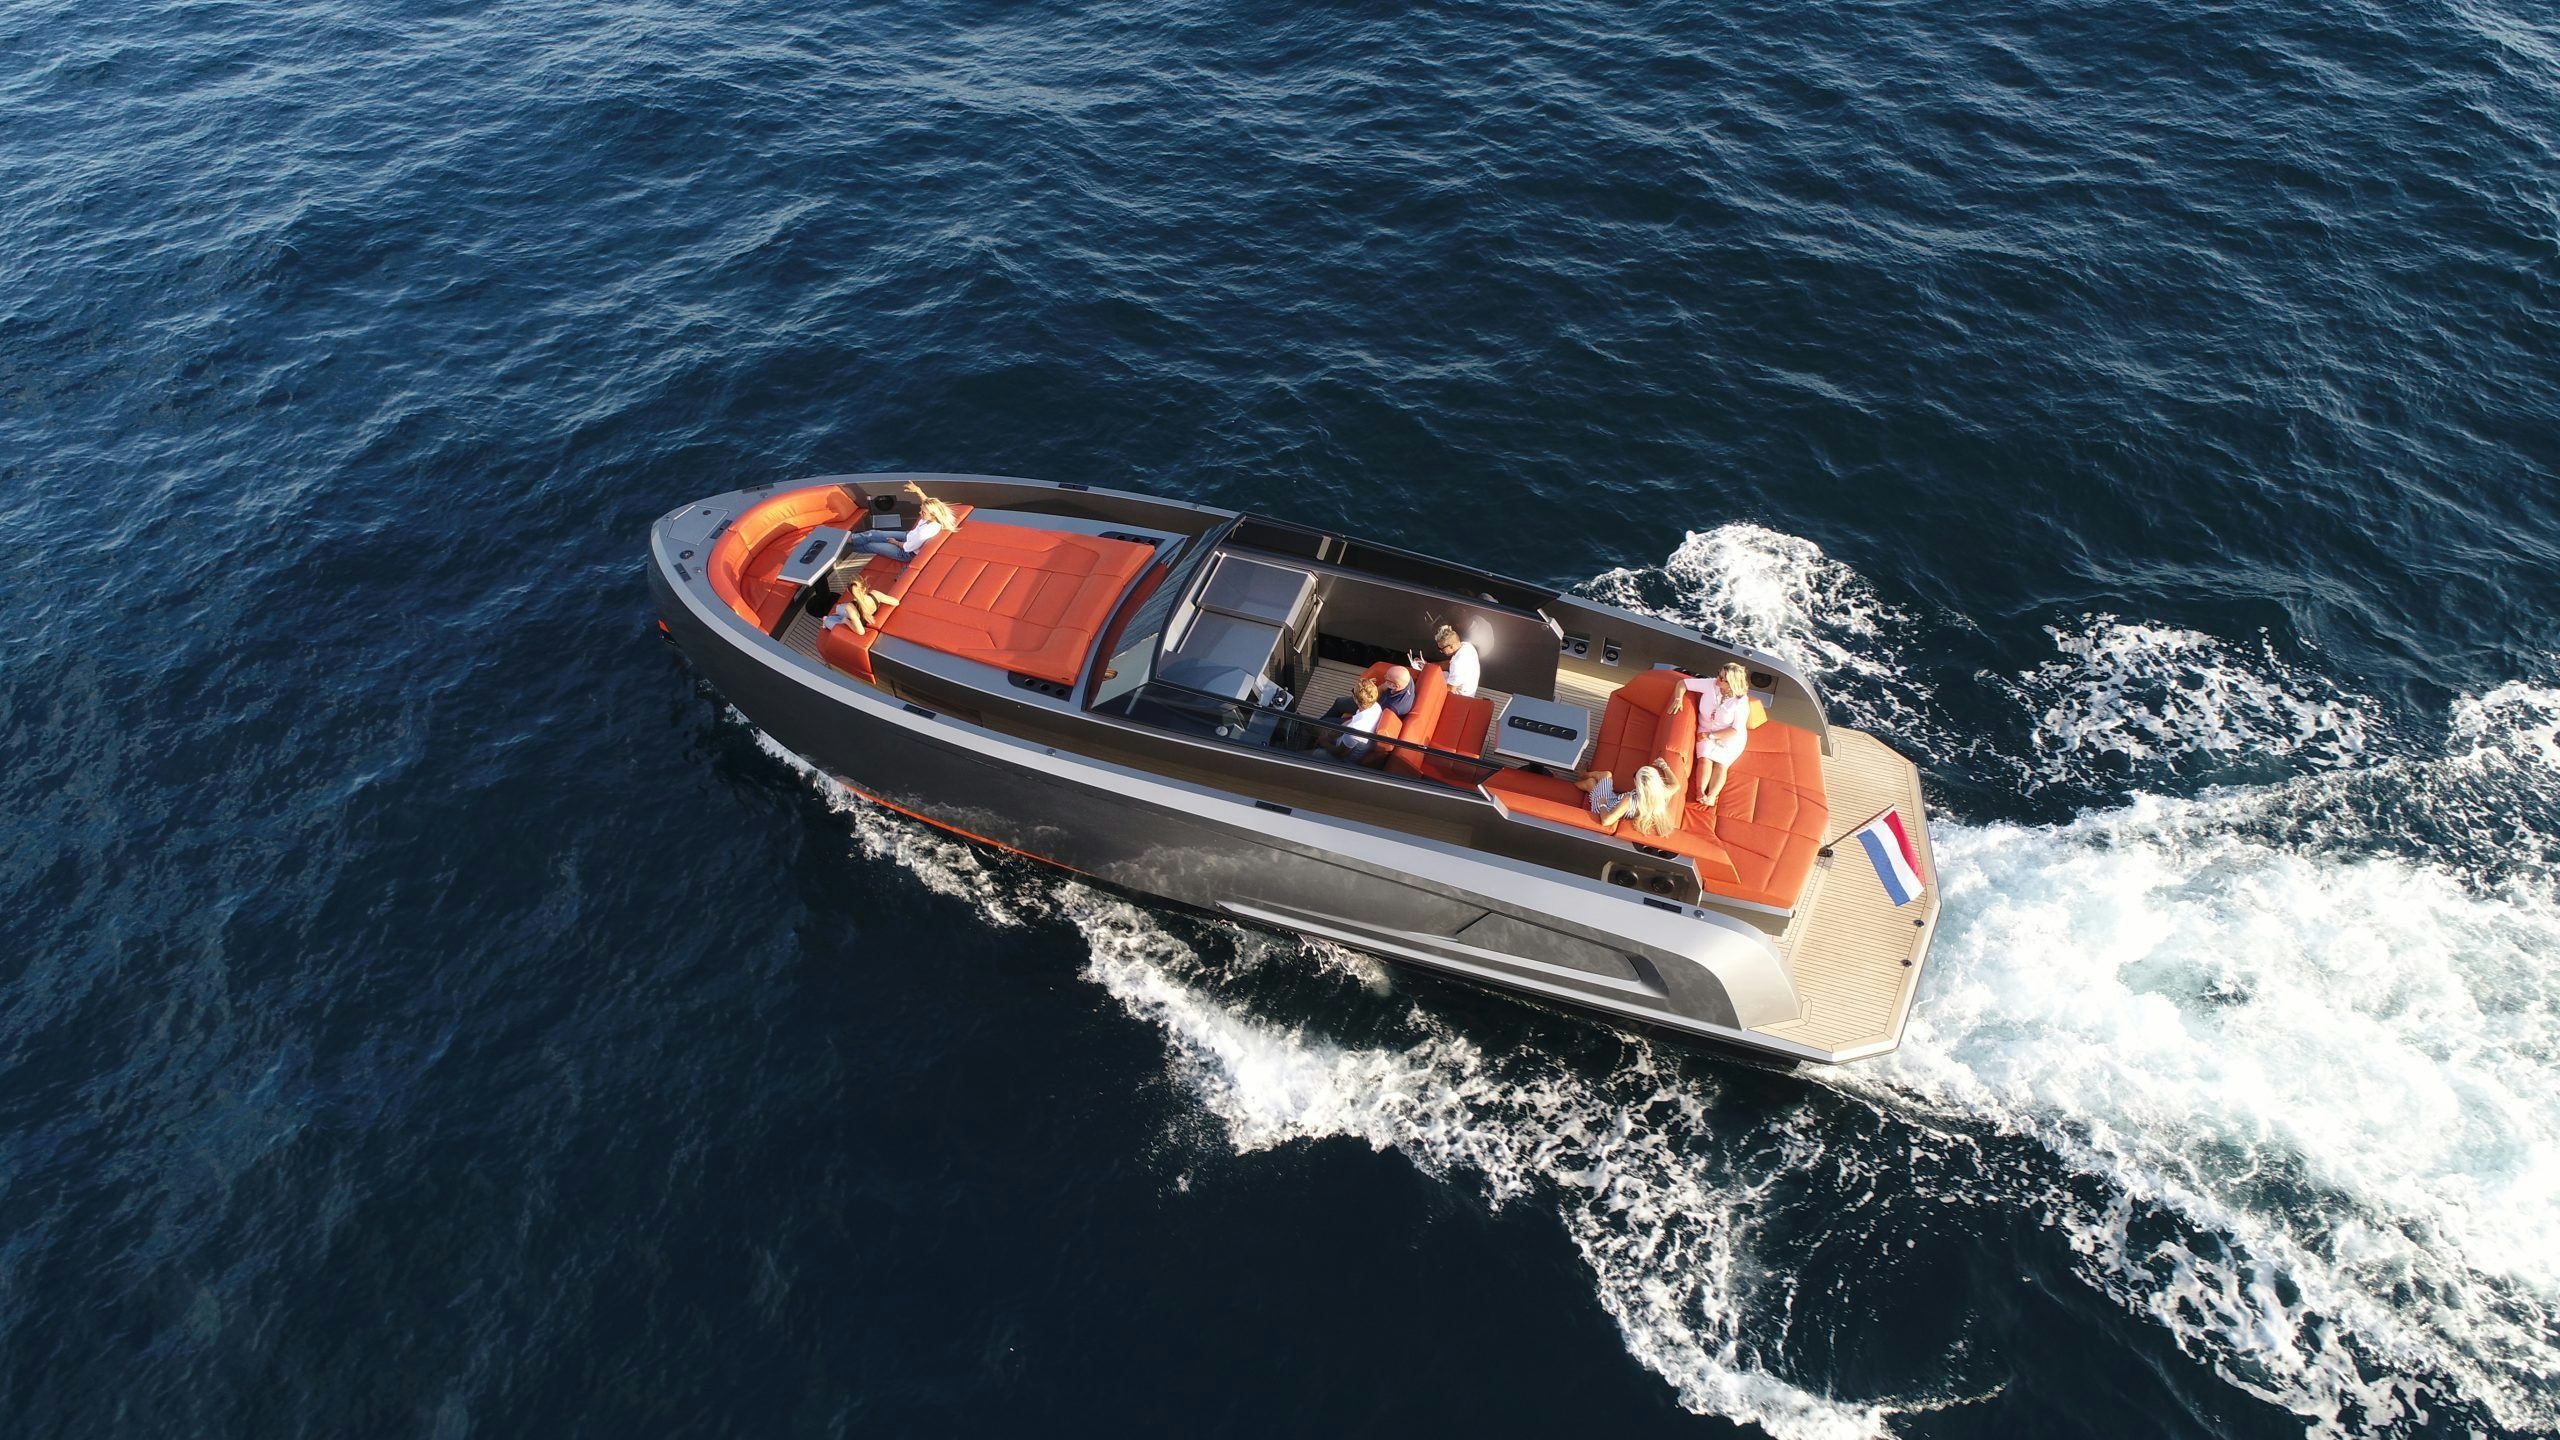 Come see the Vanquish VQ48 in Fort Lauderdale Boat Show